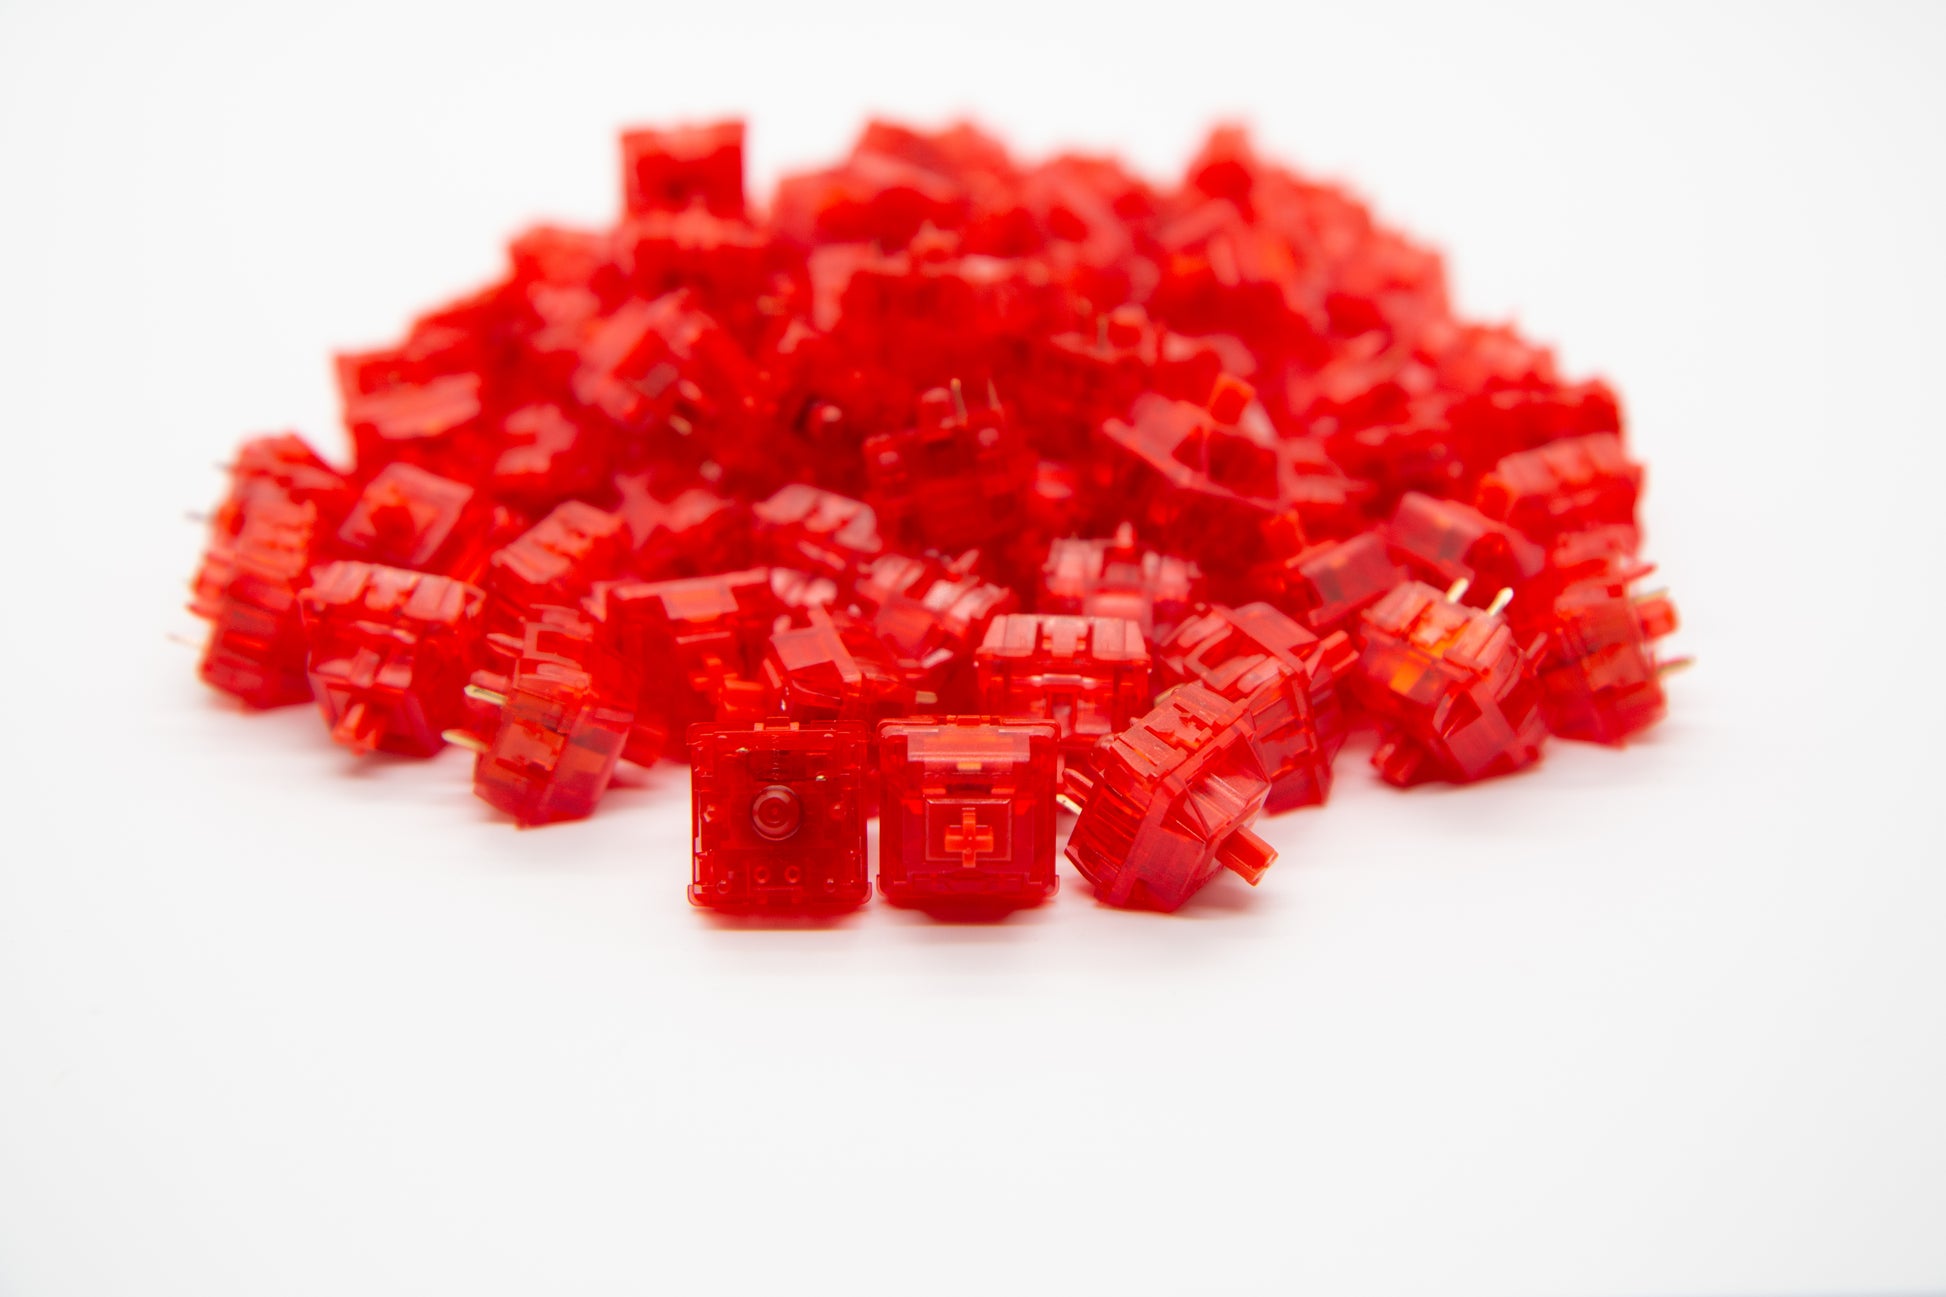 Close-up shot of a pile of Gateron Red Ink V2 mechanical keyboard switches featuring red housing and red stems